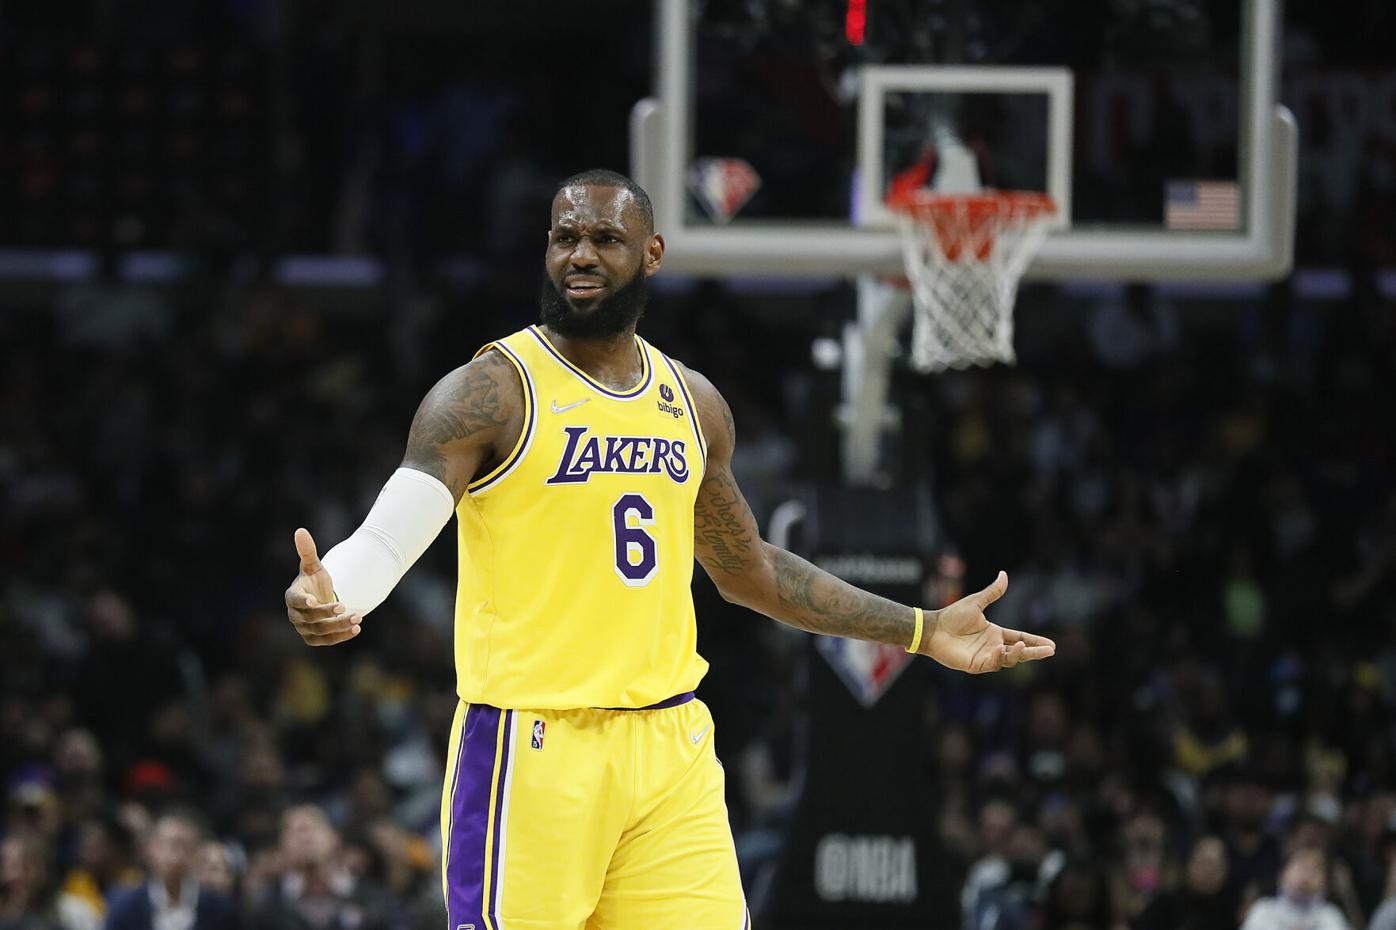 Lakers' LeBron James declines to respond to Kareem Abdul-Jabbar's criticism  - Los Angeles Times